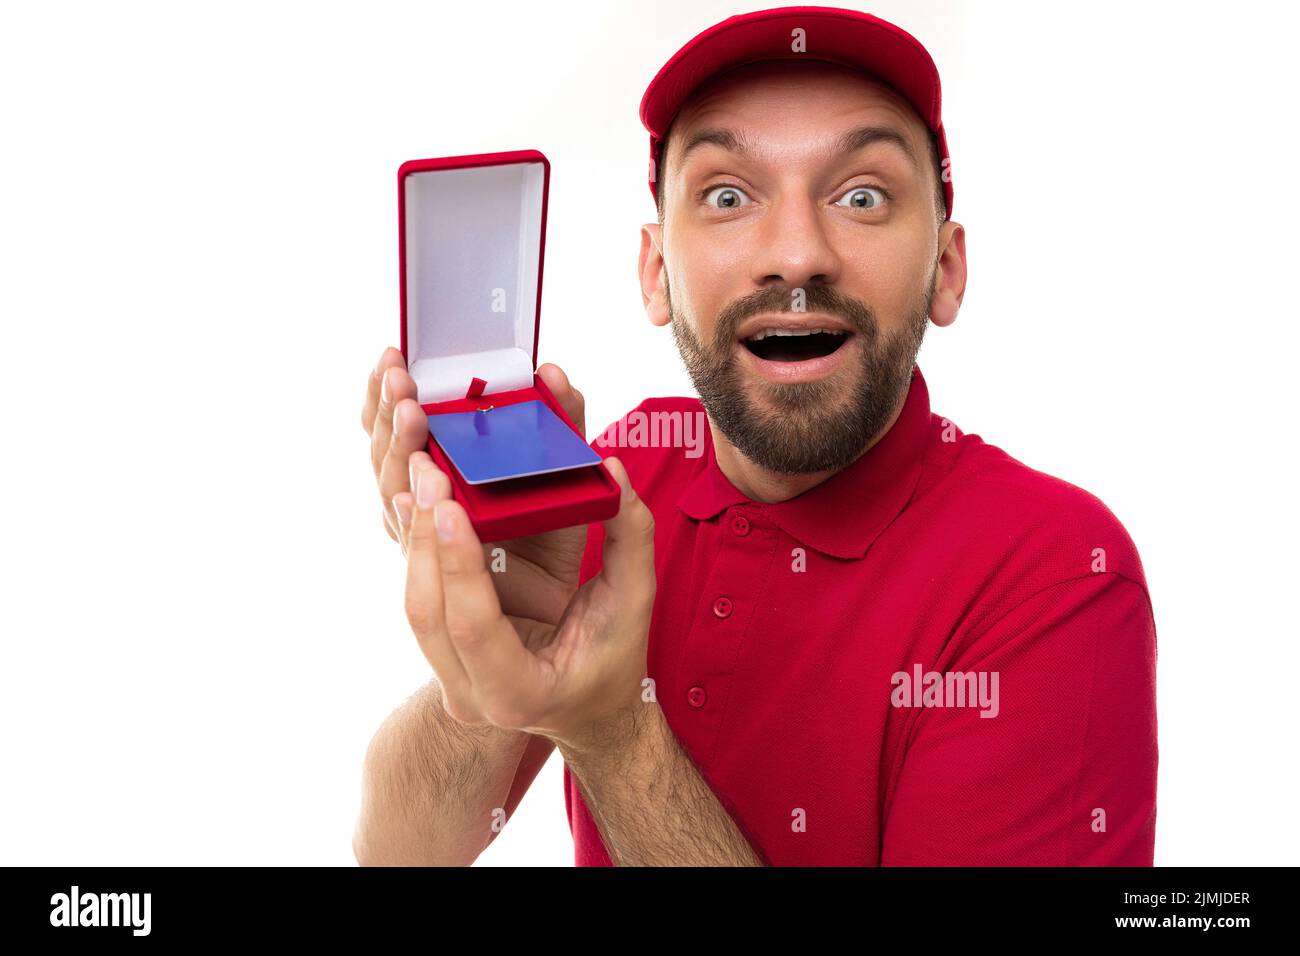 Delivery service couriers demonstrate a discount promotional card Stock Photo